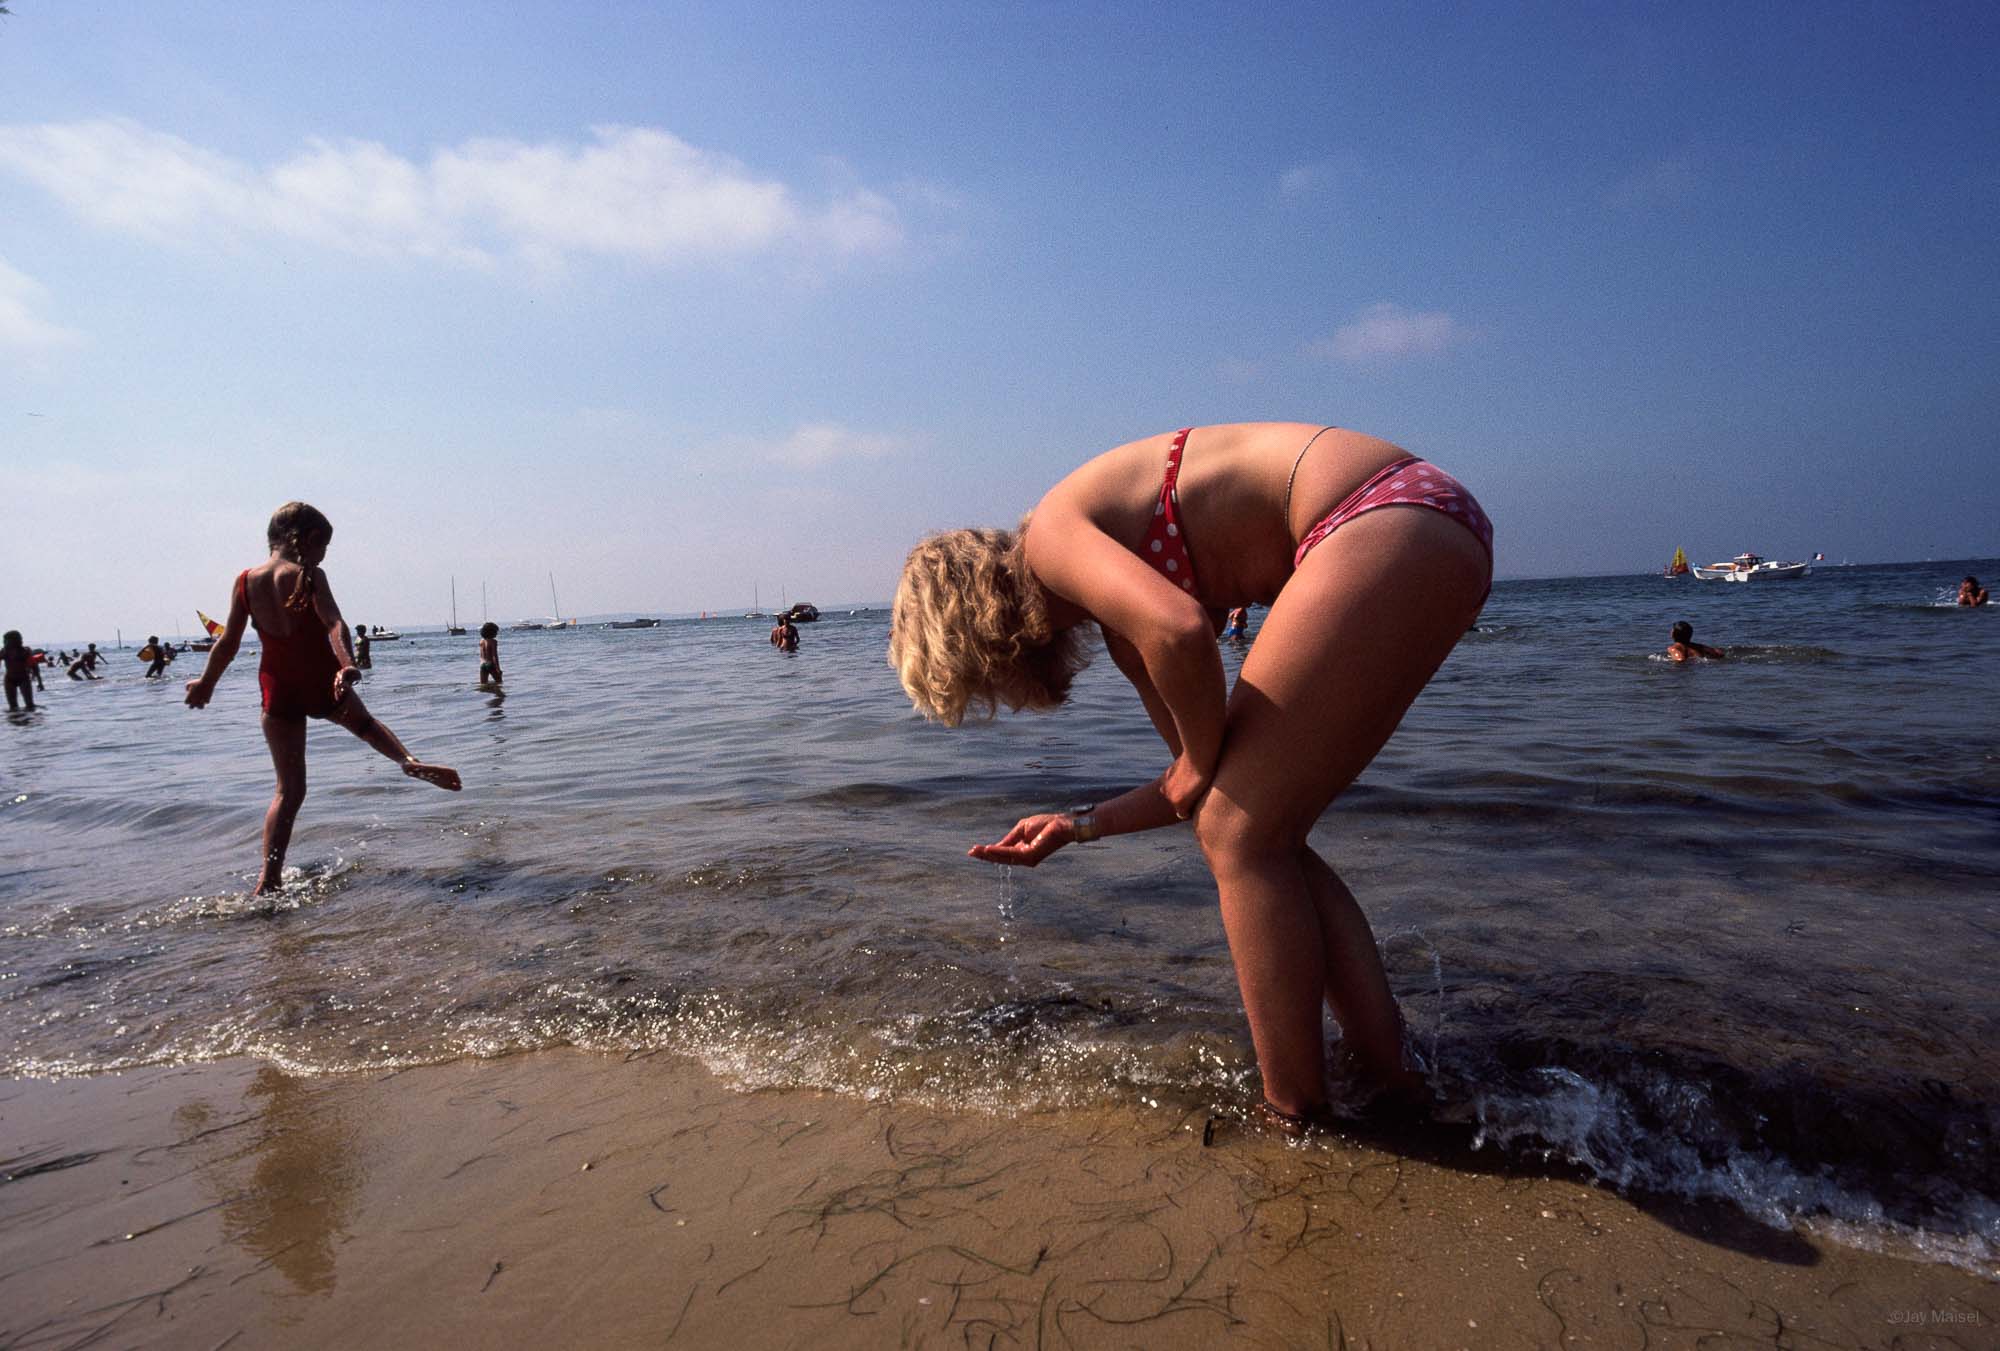 South of France, Beaches – Jay Maisel image